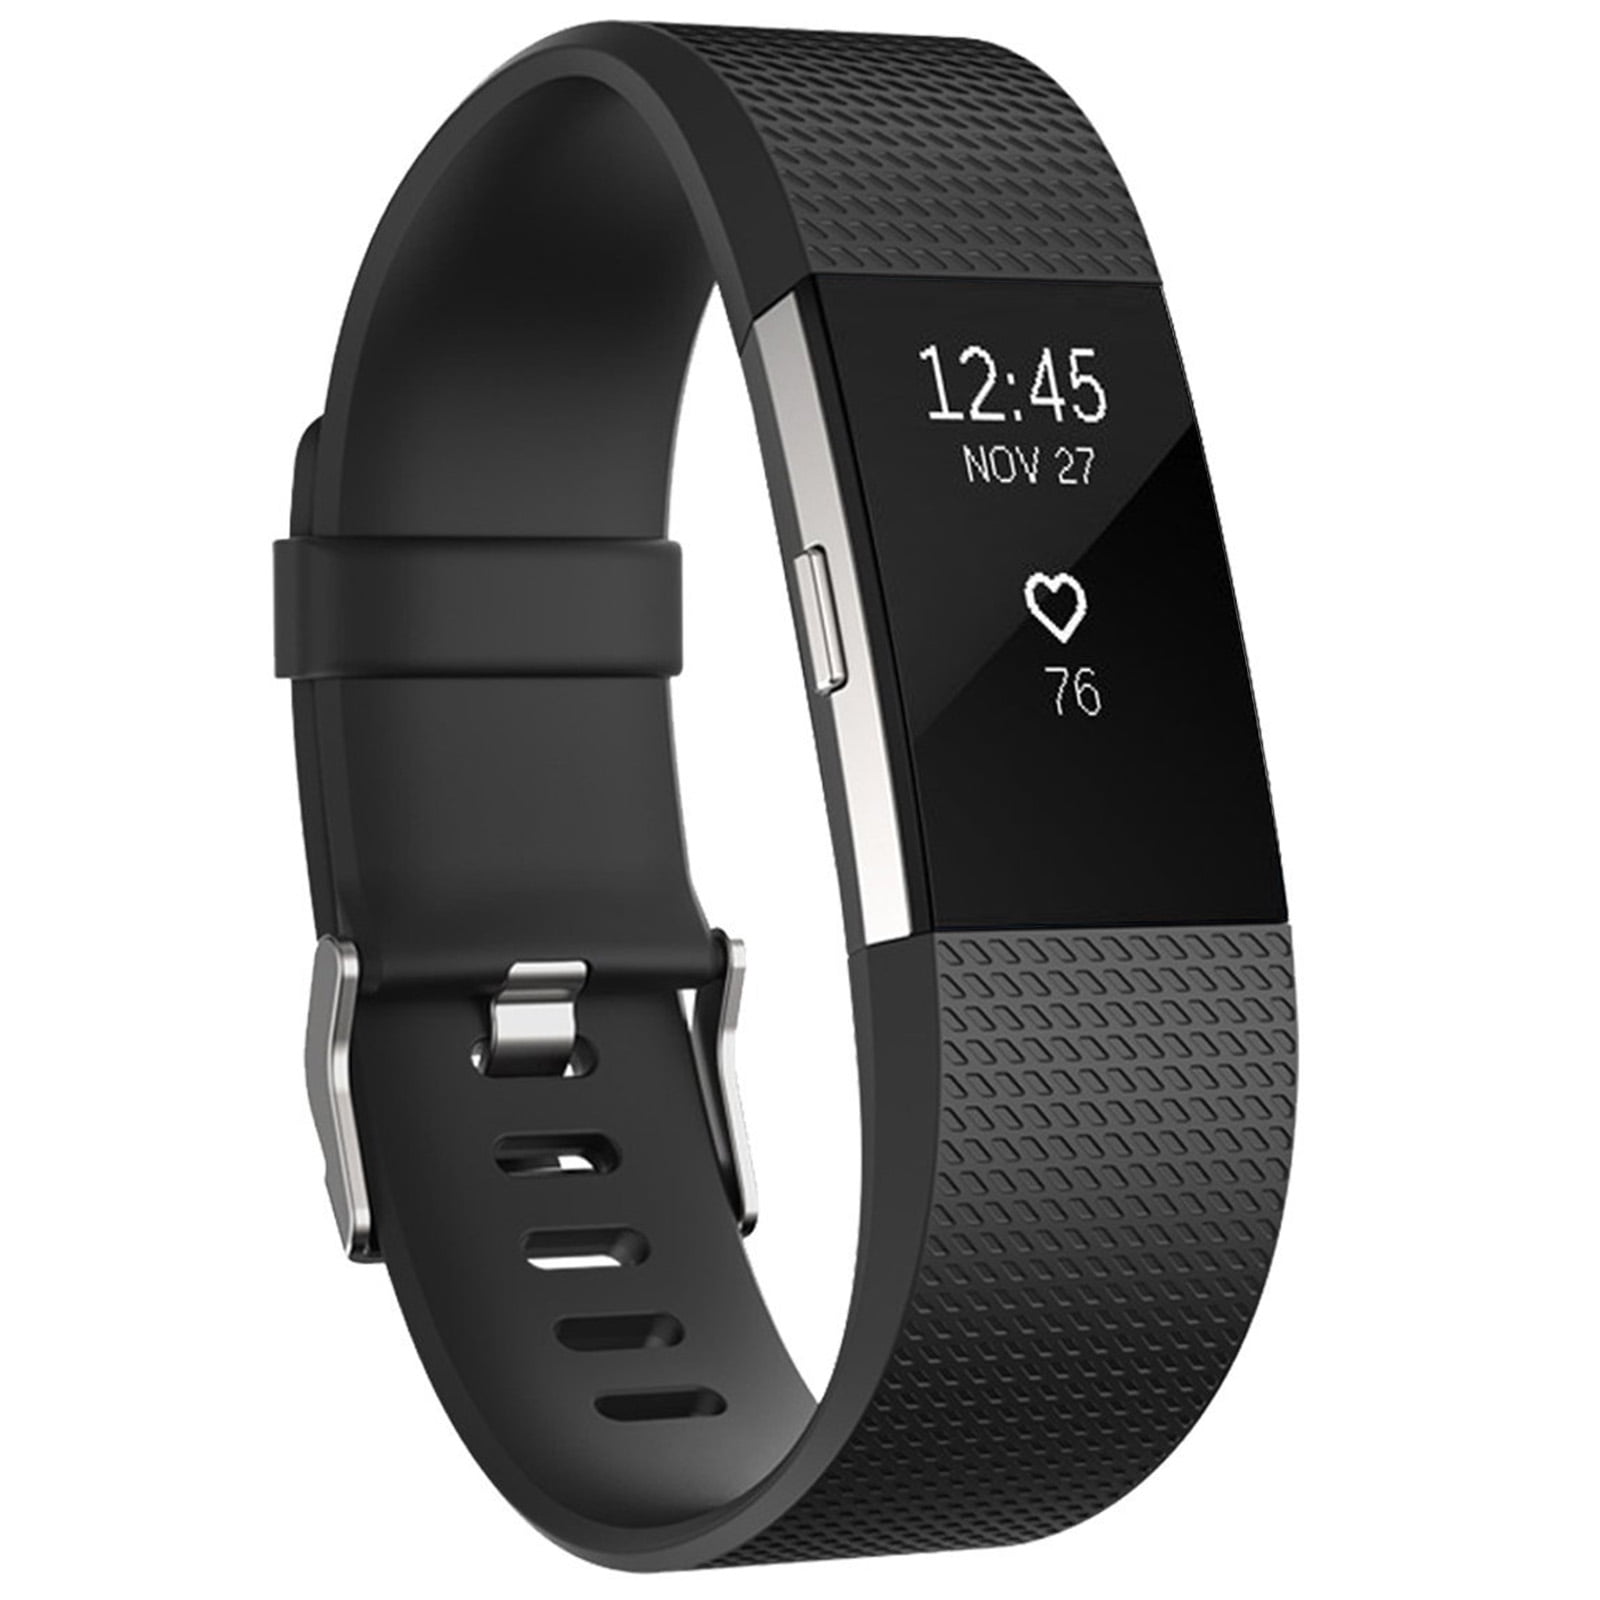 Unisex Fitbit charge2 Replacement Silicone Rubber Band Strap Wristband 